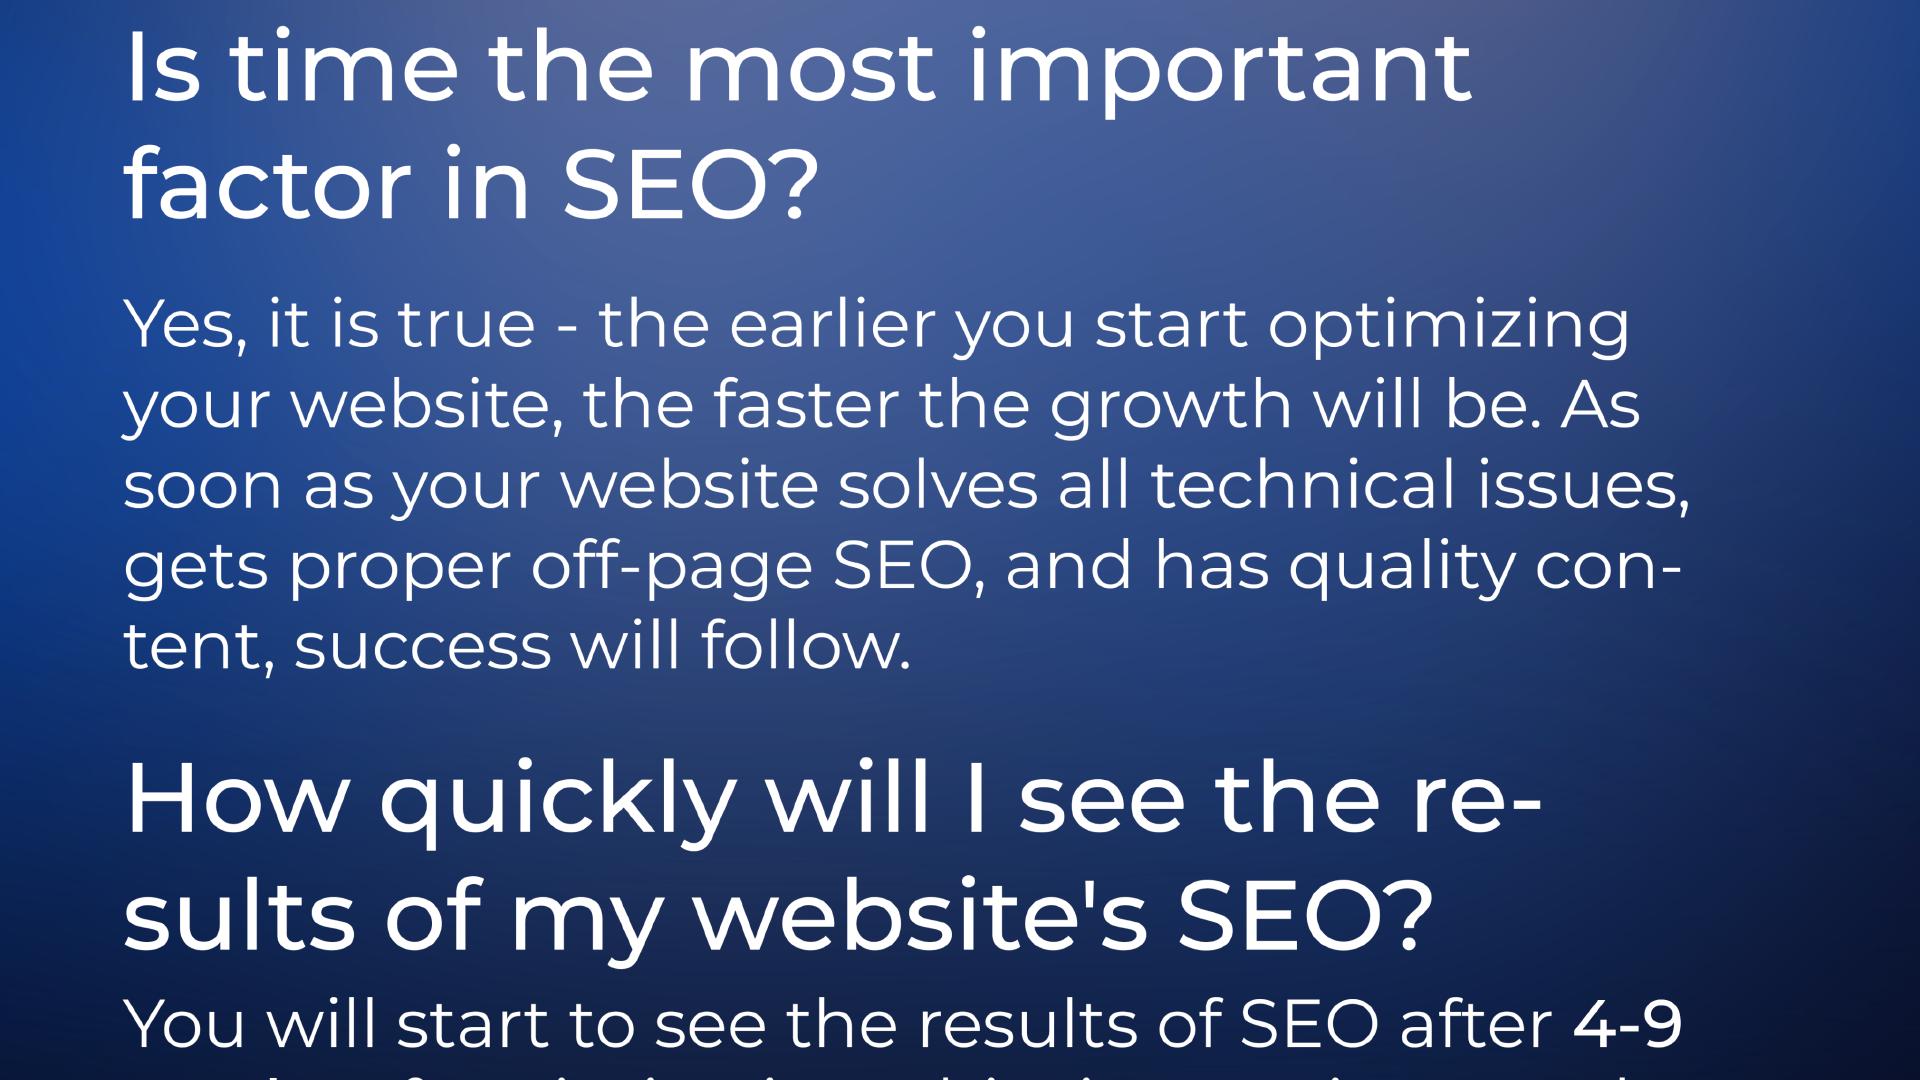 Is time the most important factor in SEO? | Yes, it is true - the earlier you start optimizing your website, the faster the growth will be. As soon as your website solves all technical issues, gets proper off-page SEO and has quality content, success will follow.